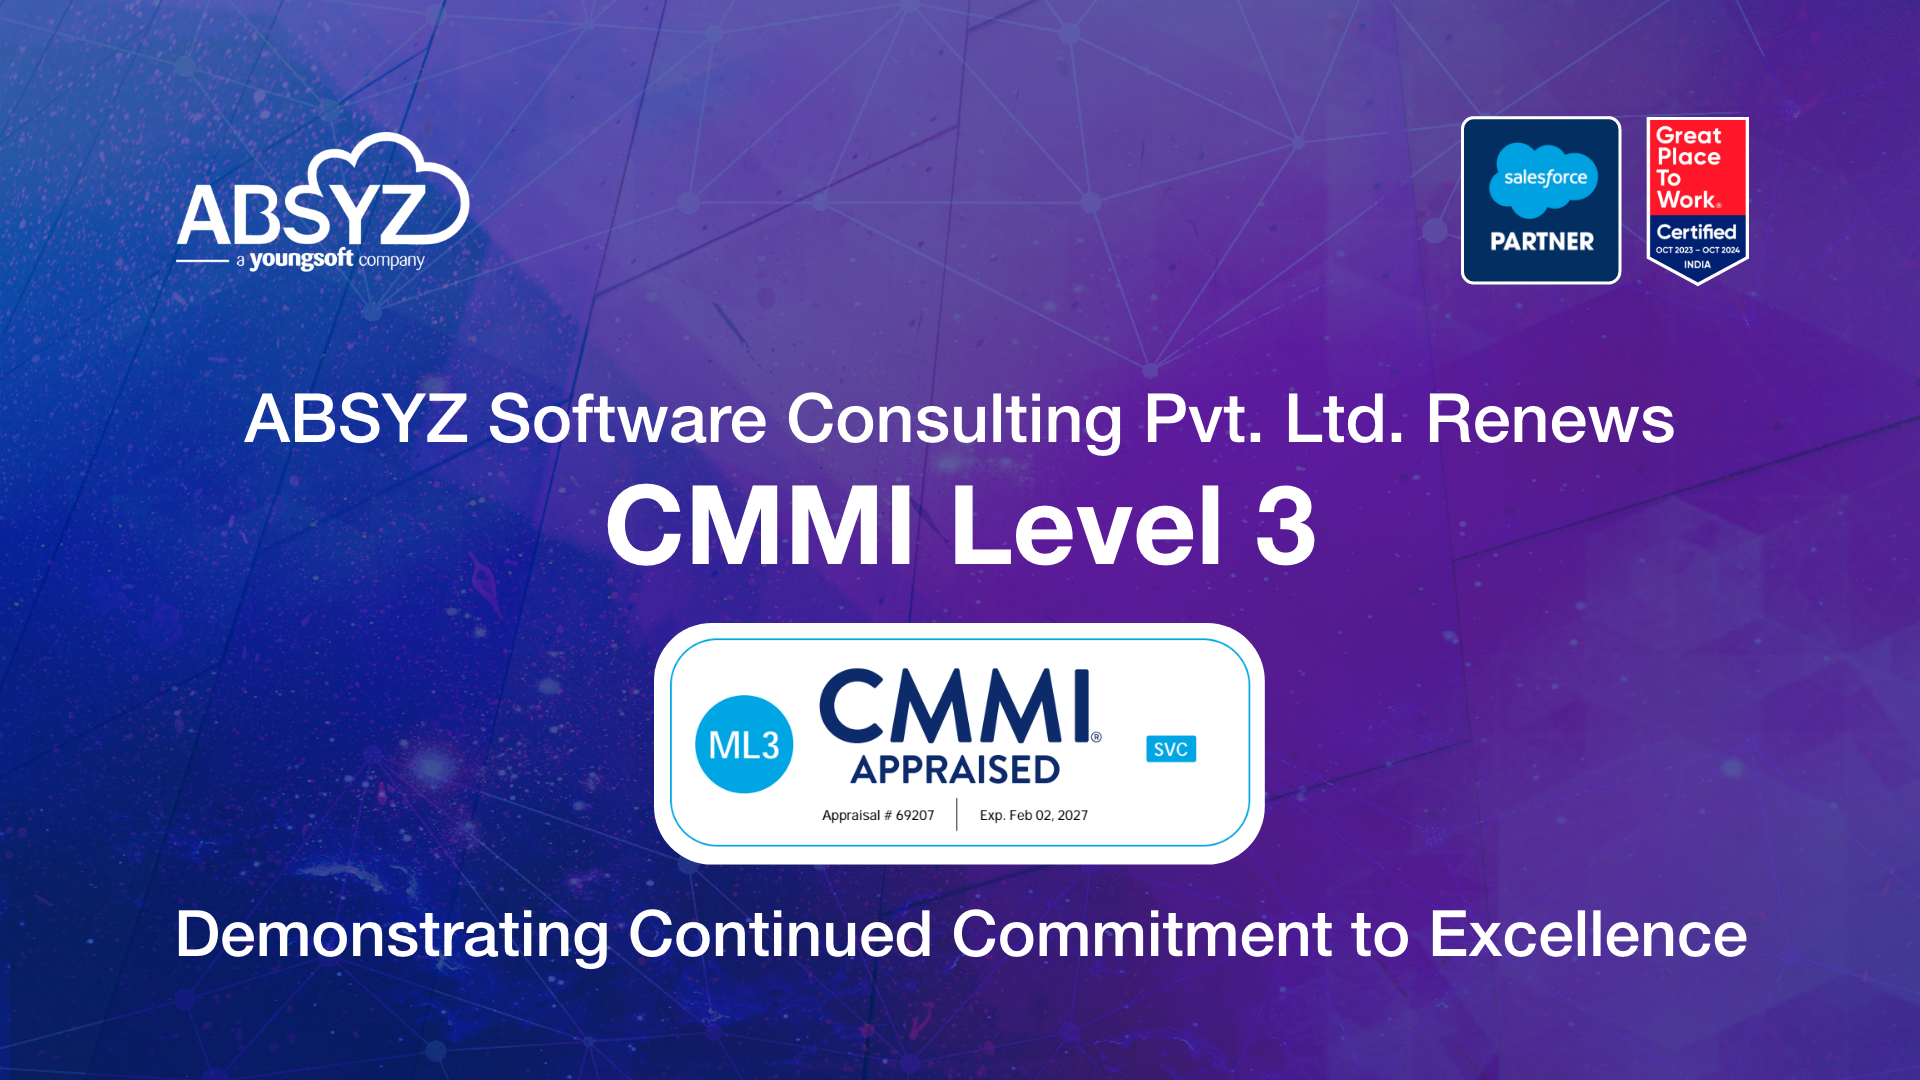 ABSYZ Software Consulting Pvt. Ltd. Renews CMMI Level 3 Accreditation